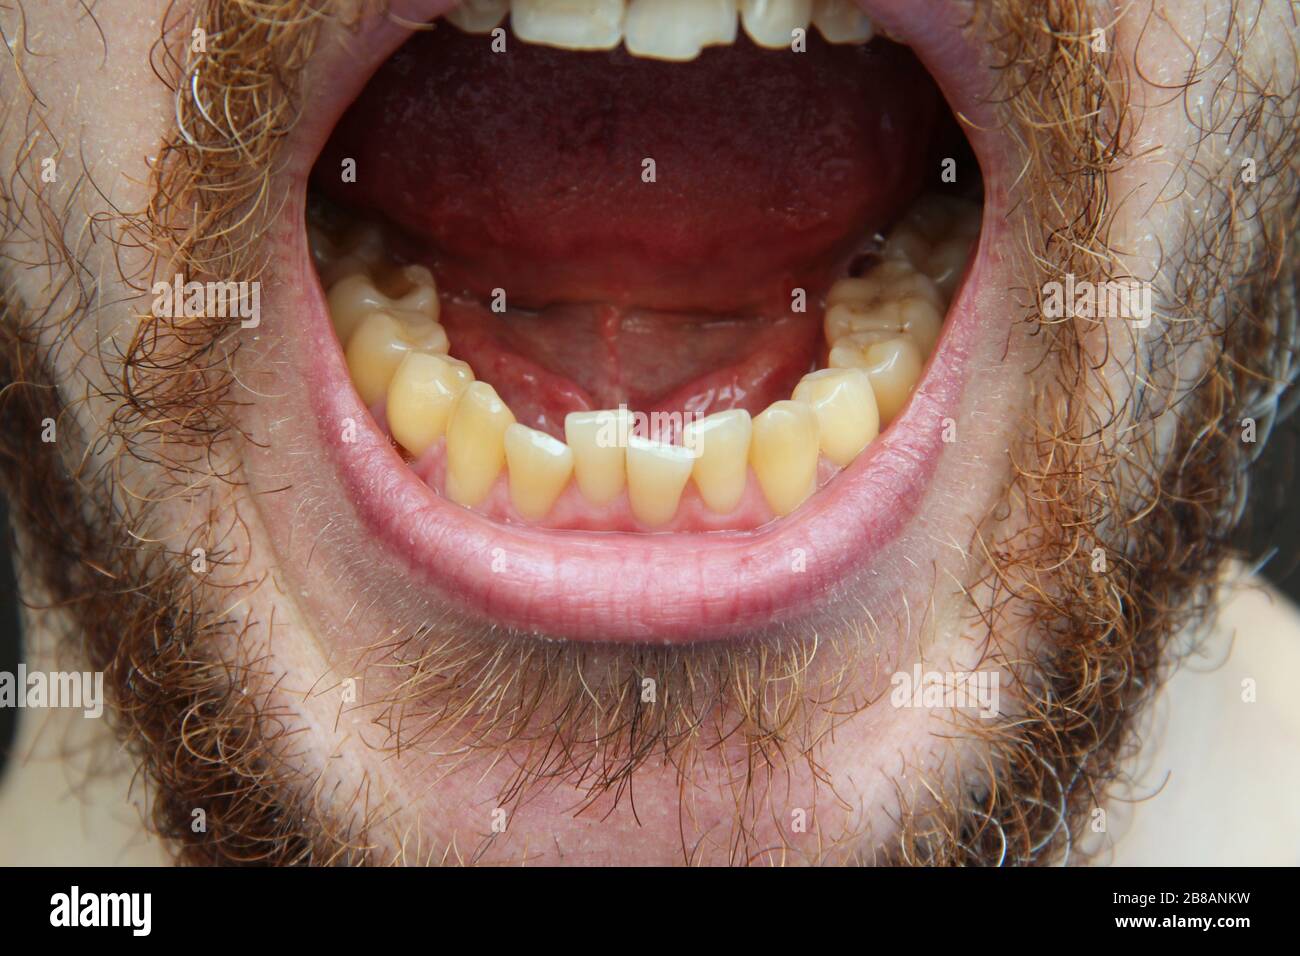 A white man with a beard and mustache shows his teeth and open mouth. Close-up part of the face, yellowish teeth, cheeks and chin. Medicine, oral health. Stock Photo